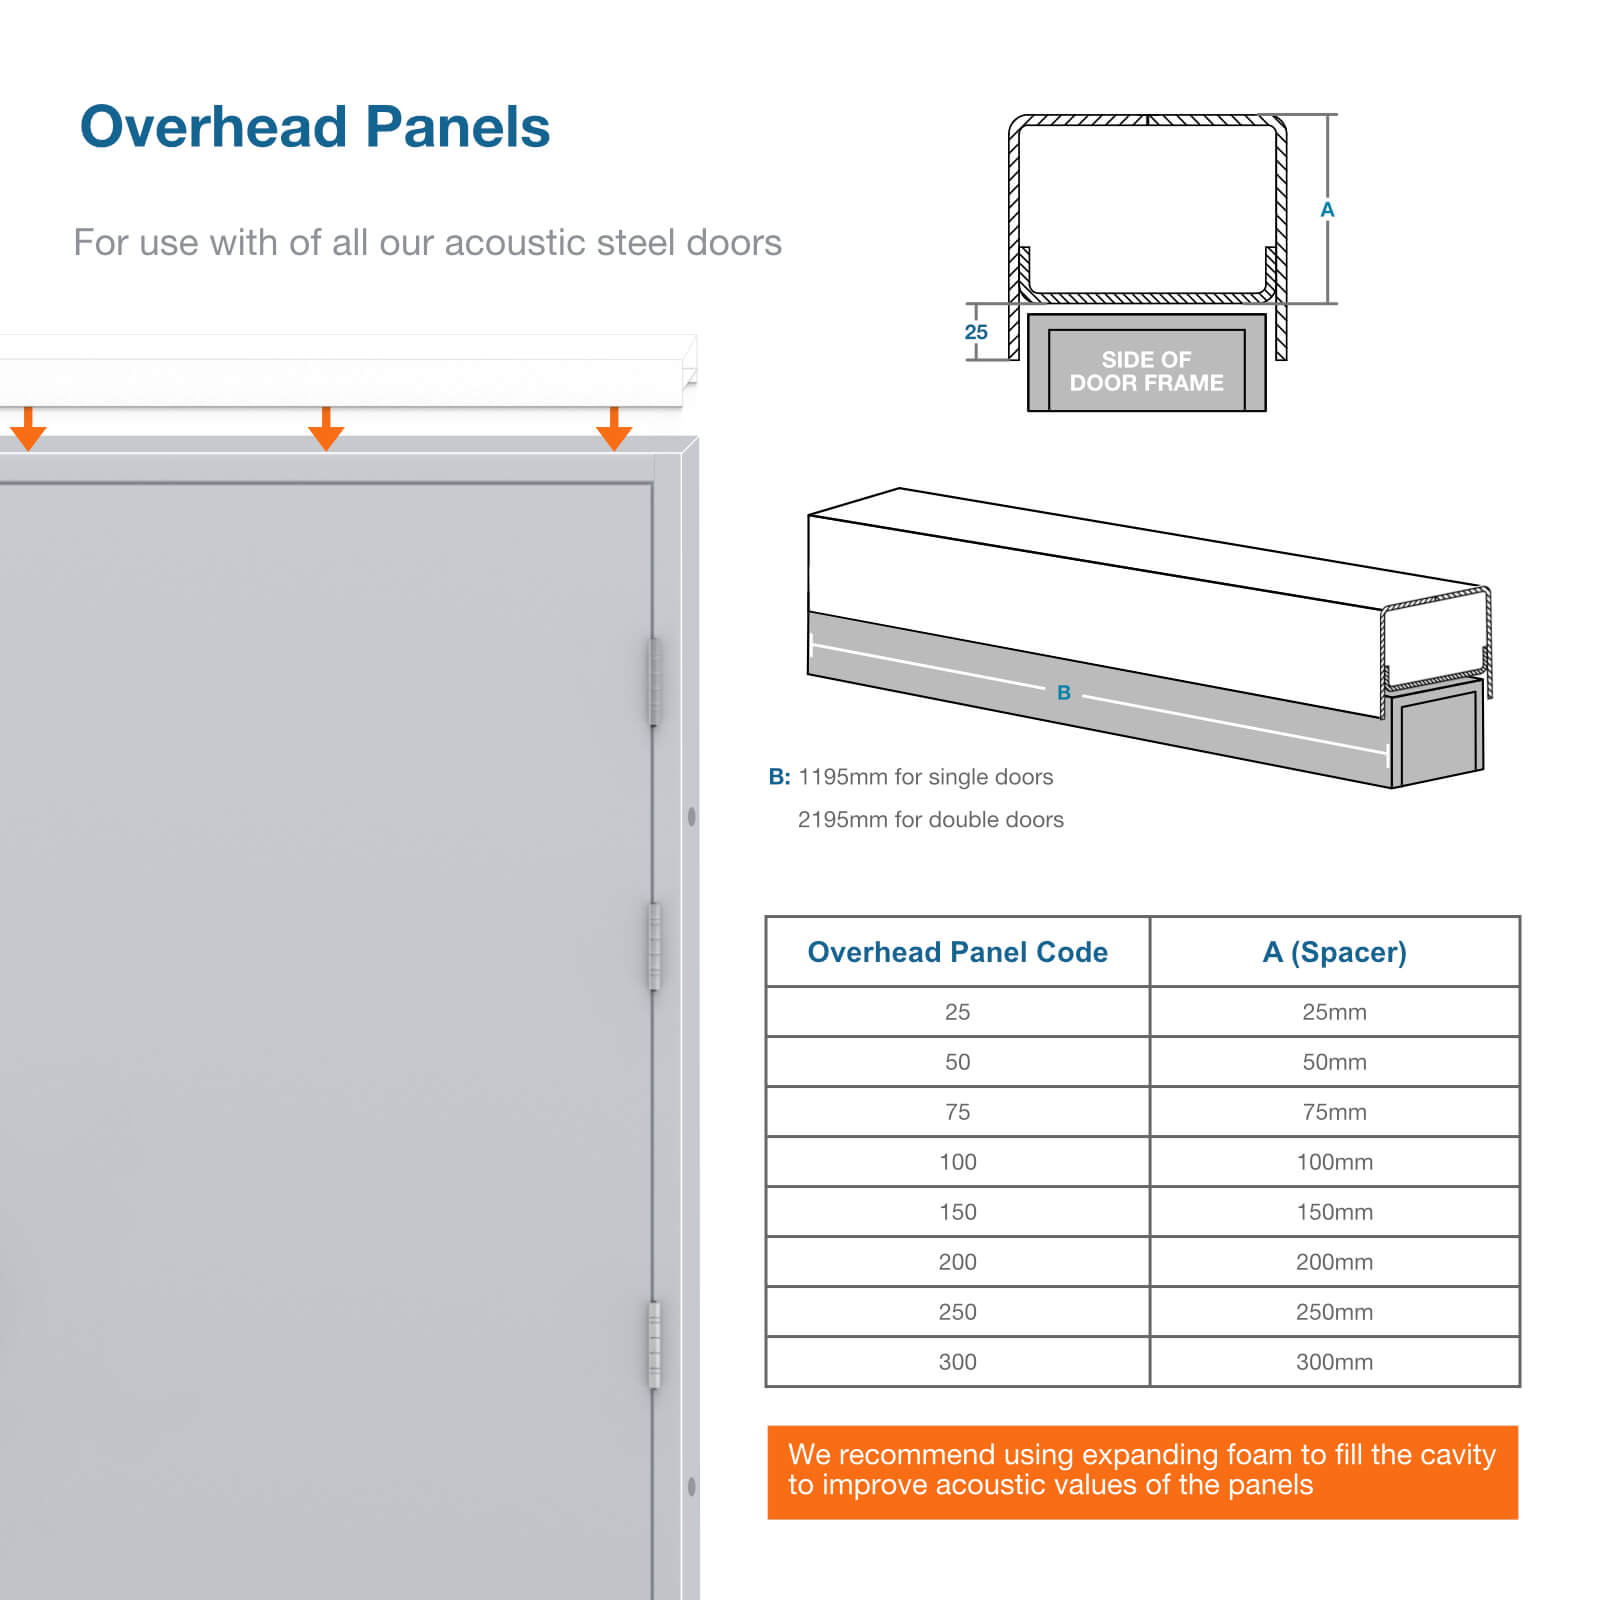 More info image for acoustic door over head panels